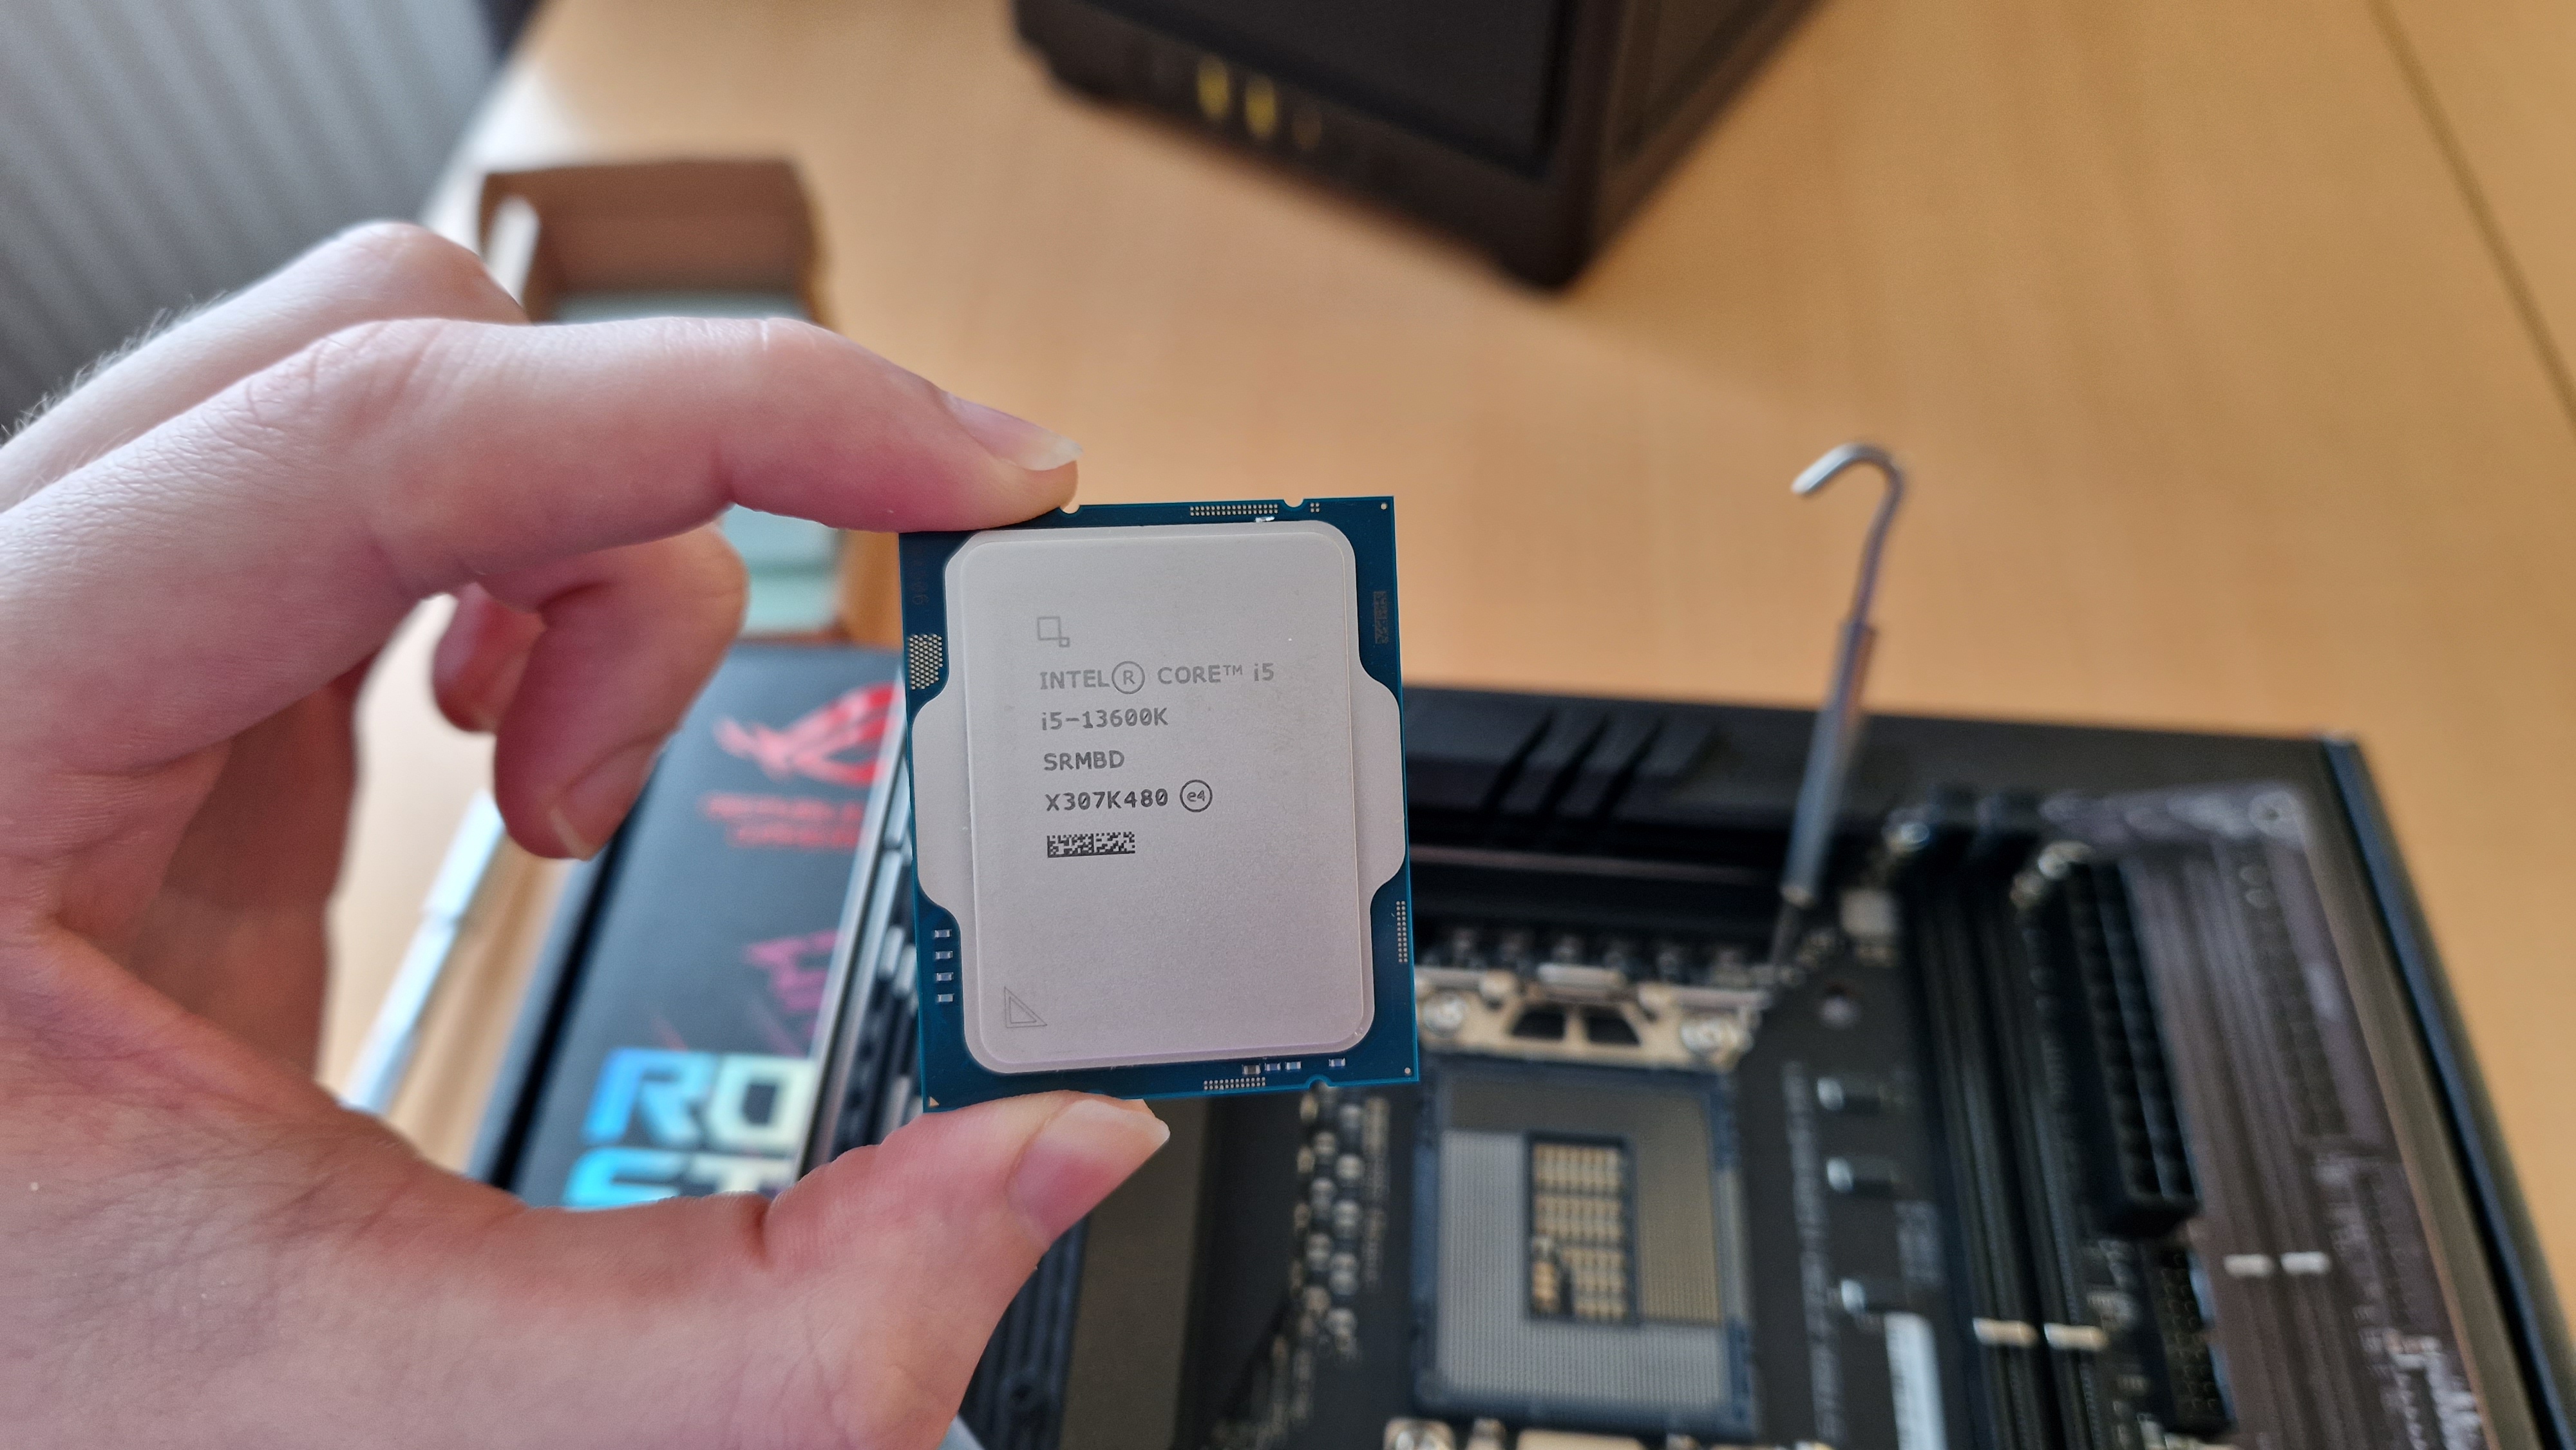 13th Gen Intel i5-13600K review: Makes me question who on earth